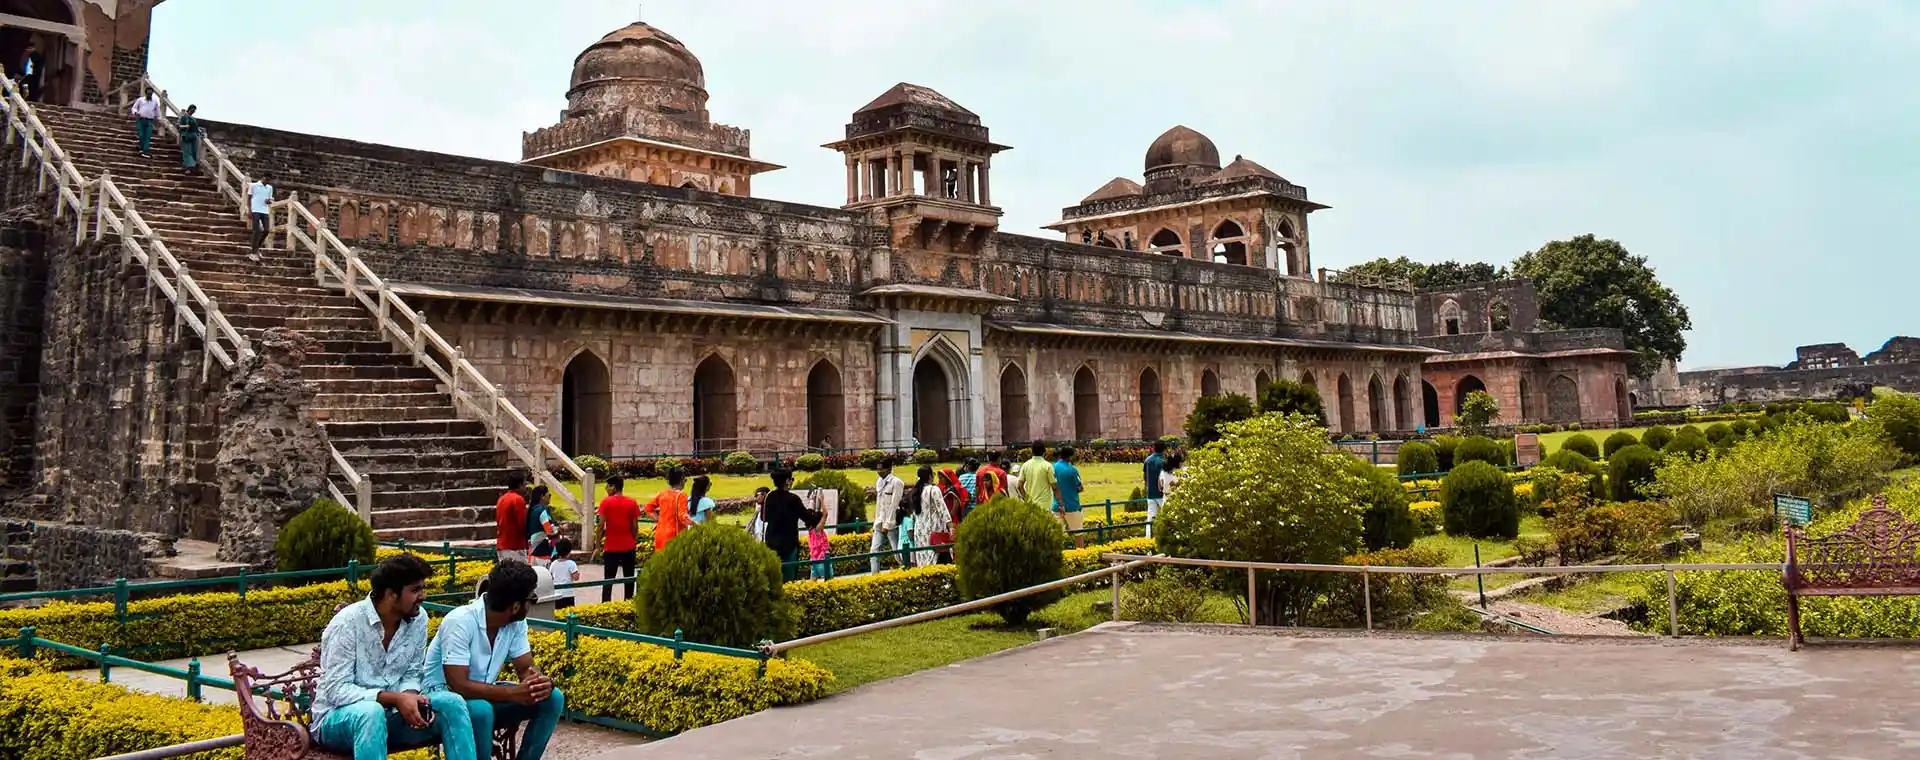 Top 11 Places to Visit in Mandu